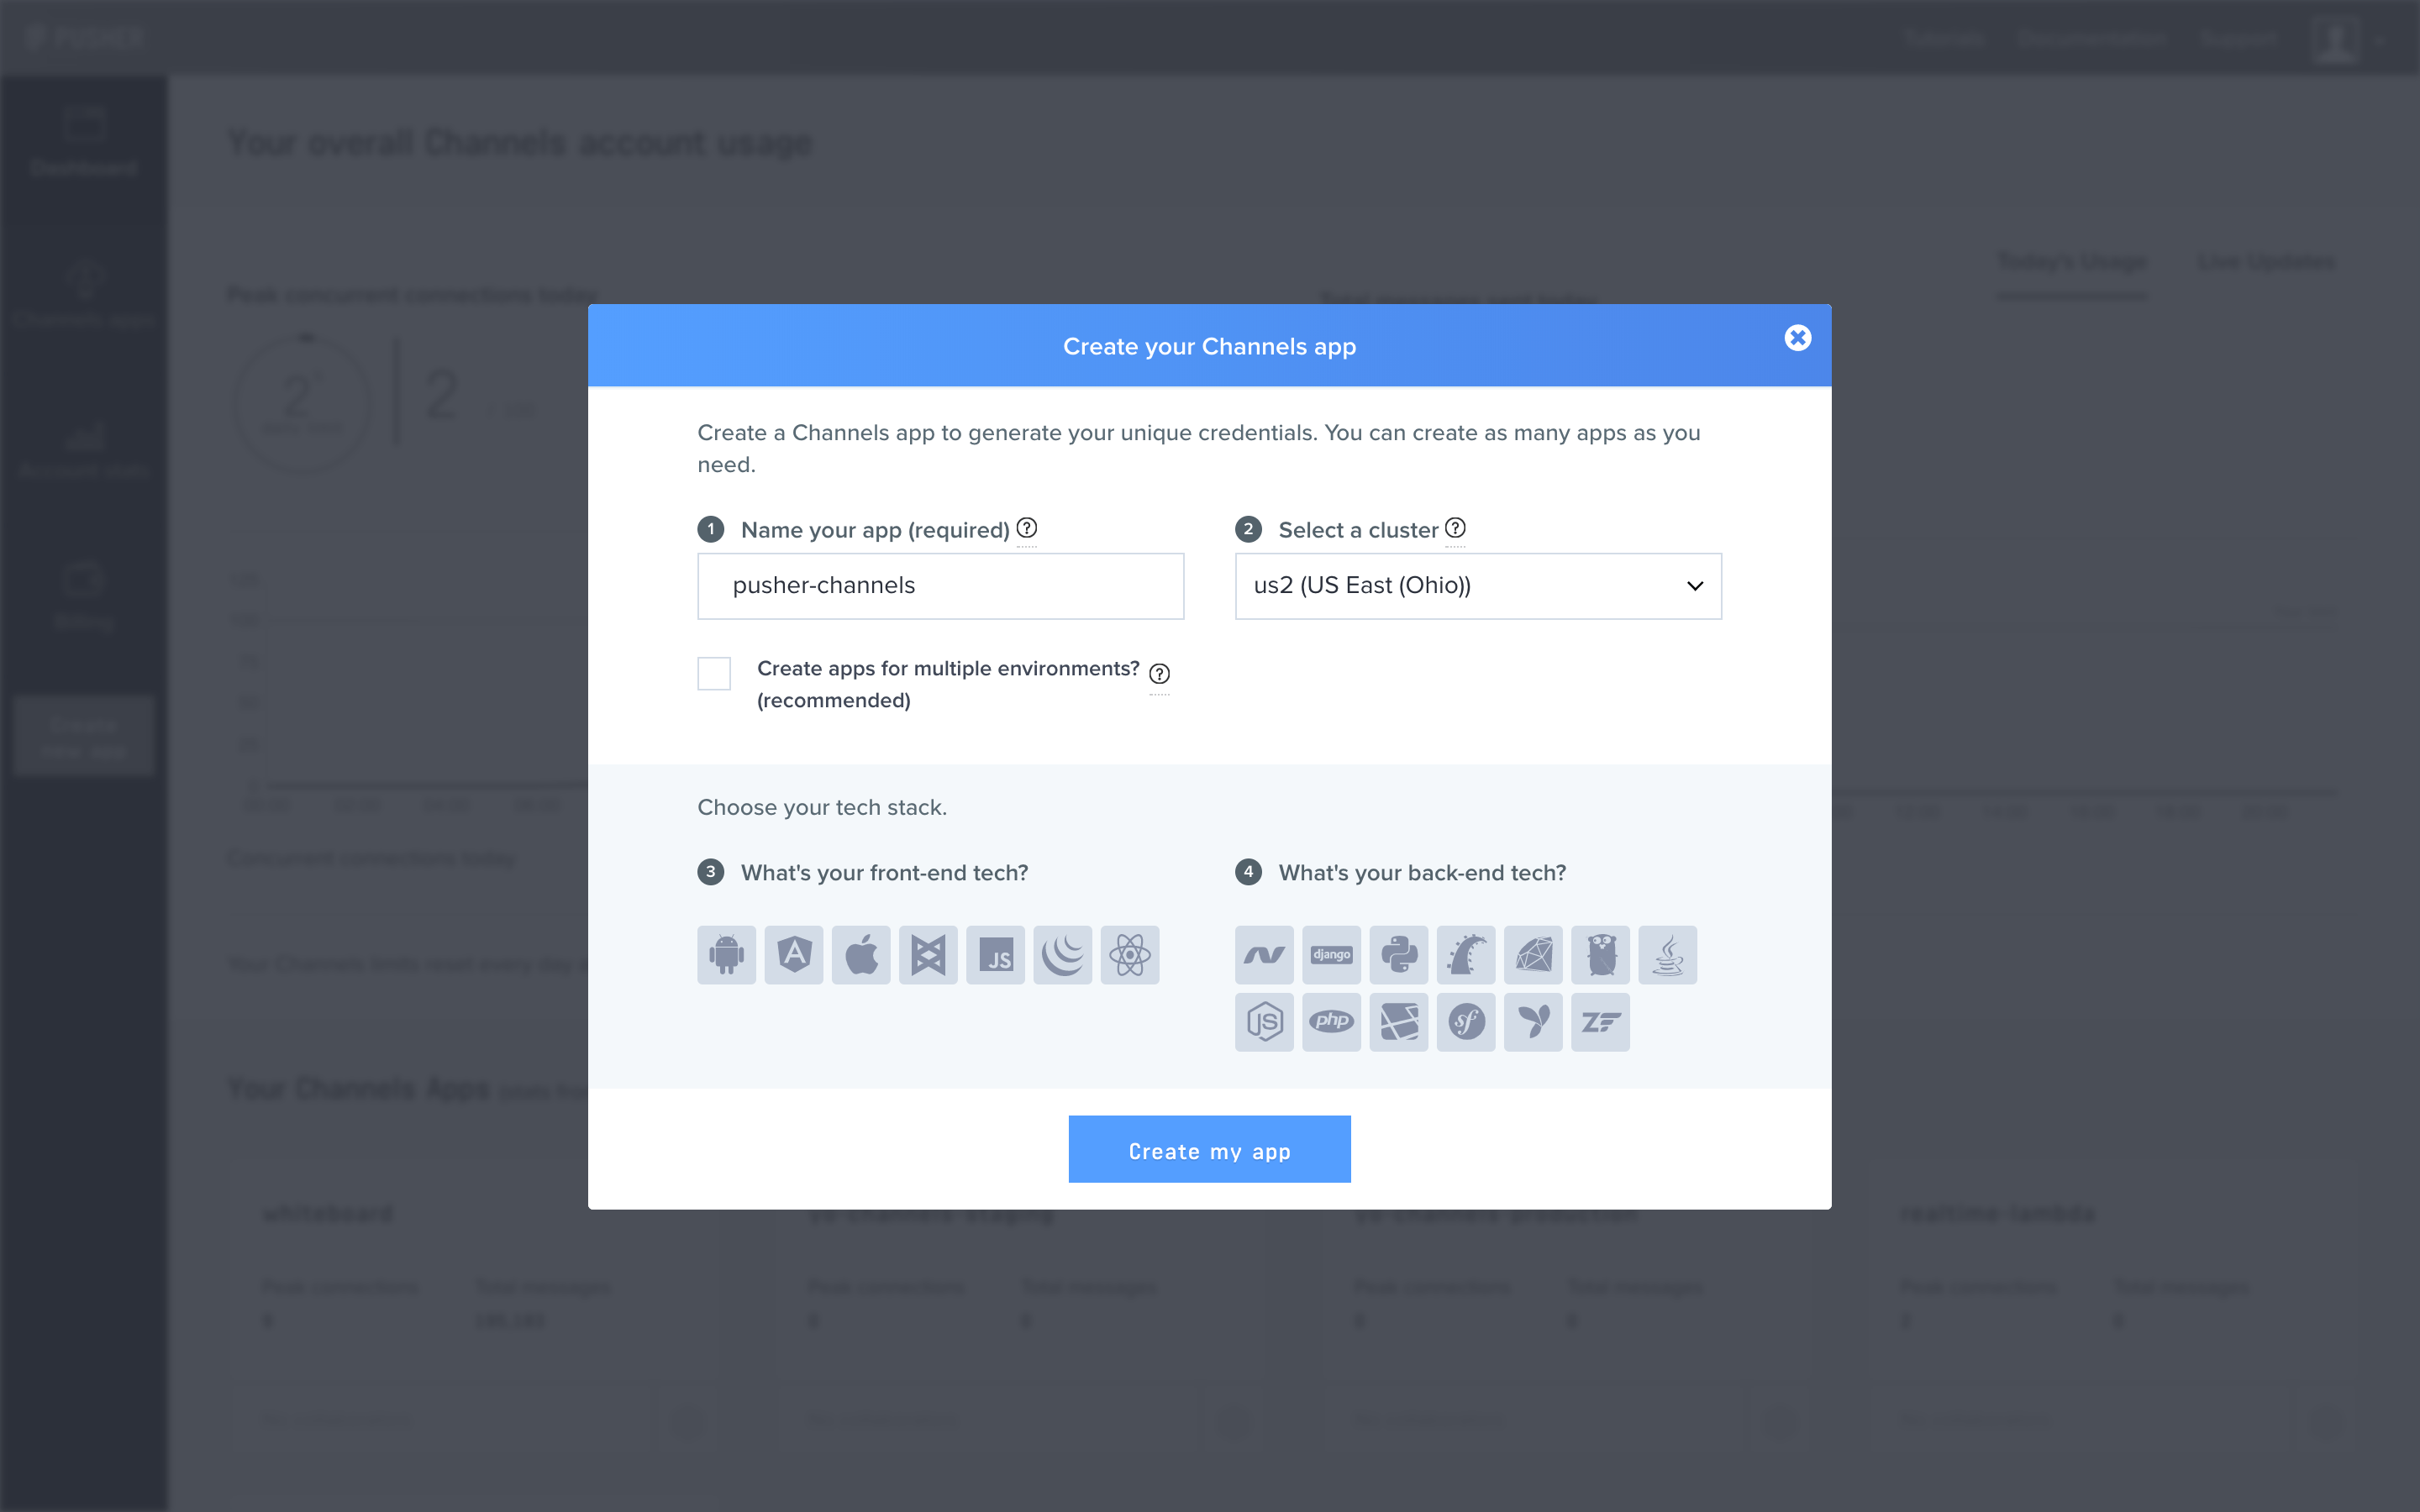 Adding a name and region to the app from the Channels dashboard.